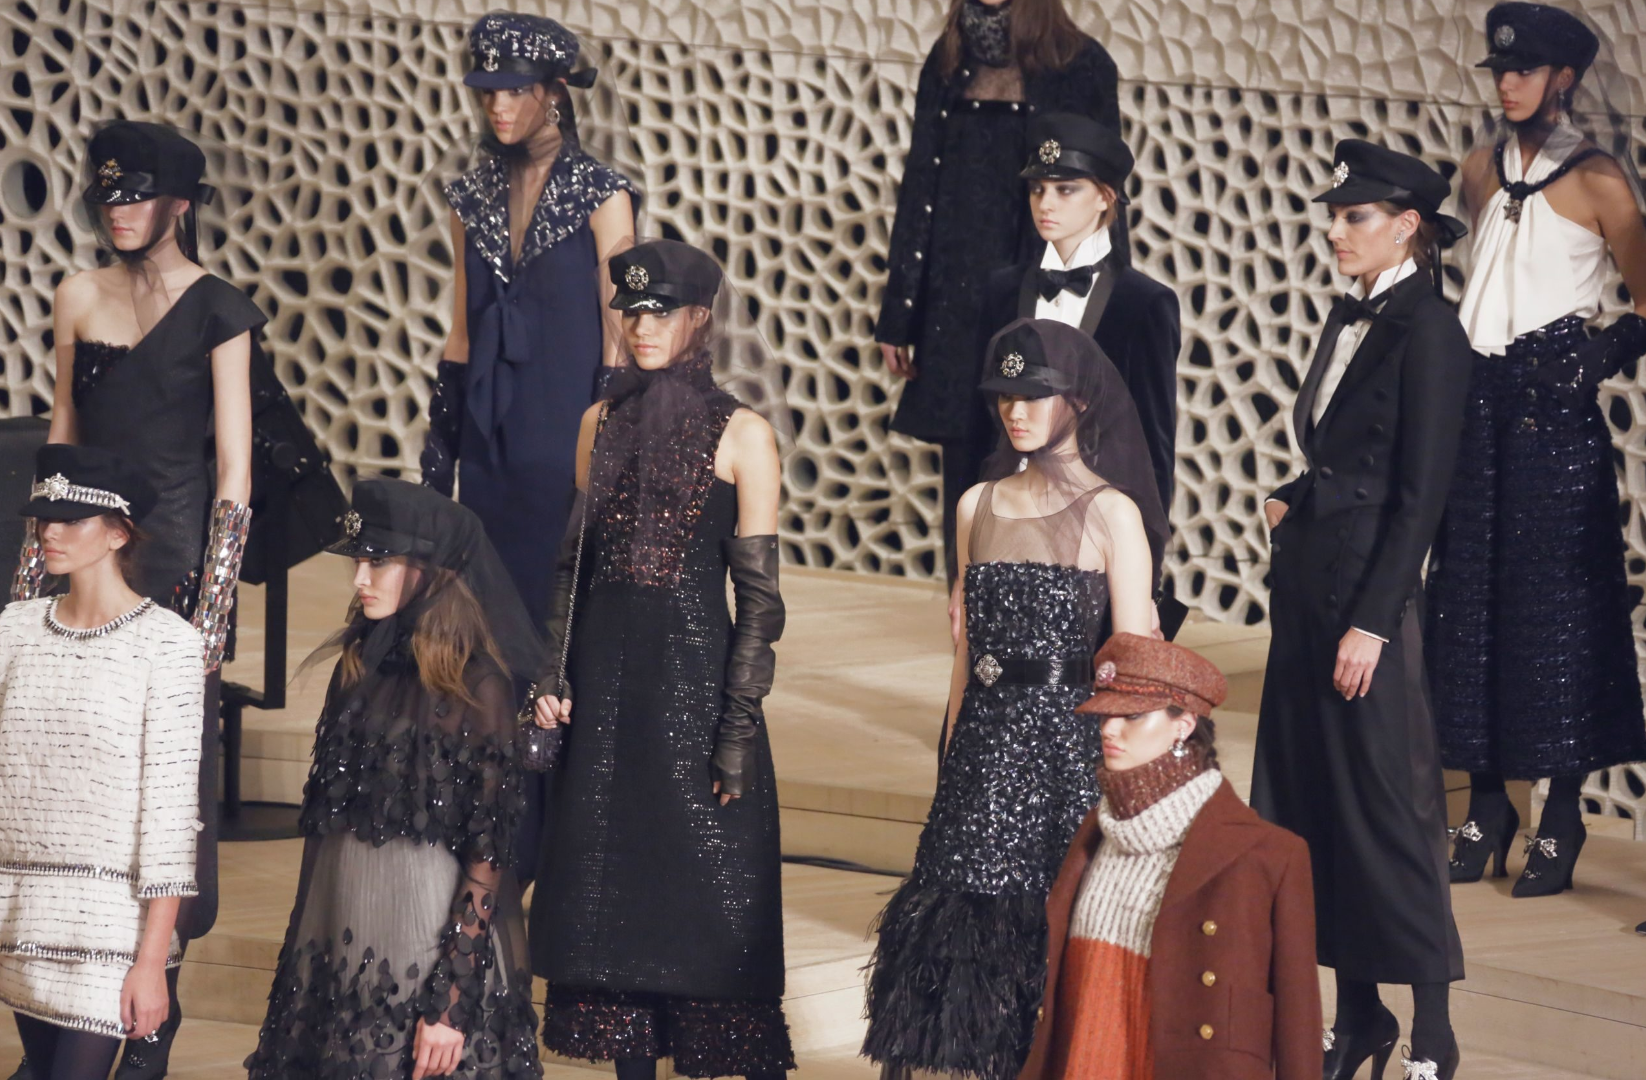 Ahoy! Karl Lagerfeld Sails Home to Hamburg for Chanel's Métiers d